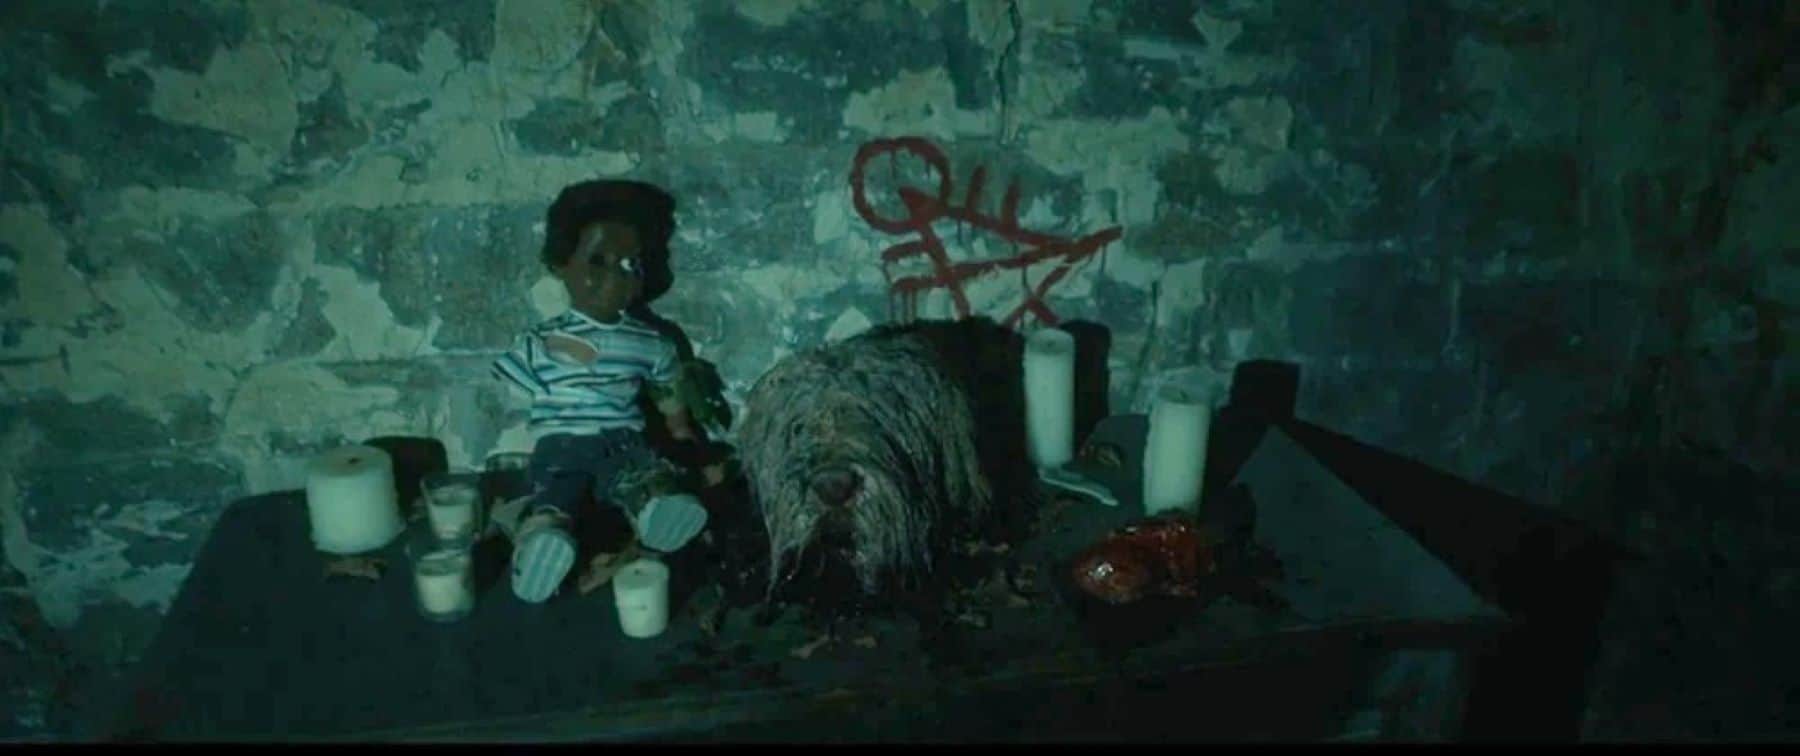 A doll, a dog’s head, and some candles adorn a table in this photo by Showtime.